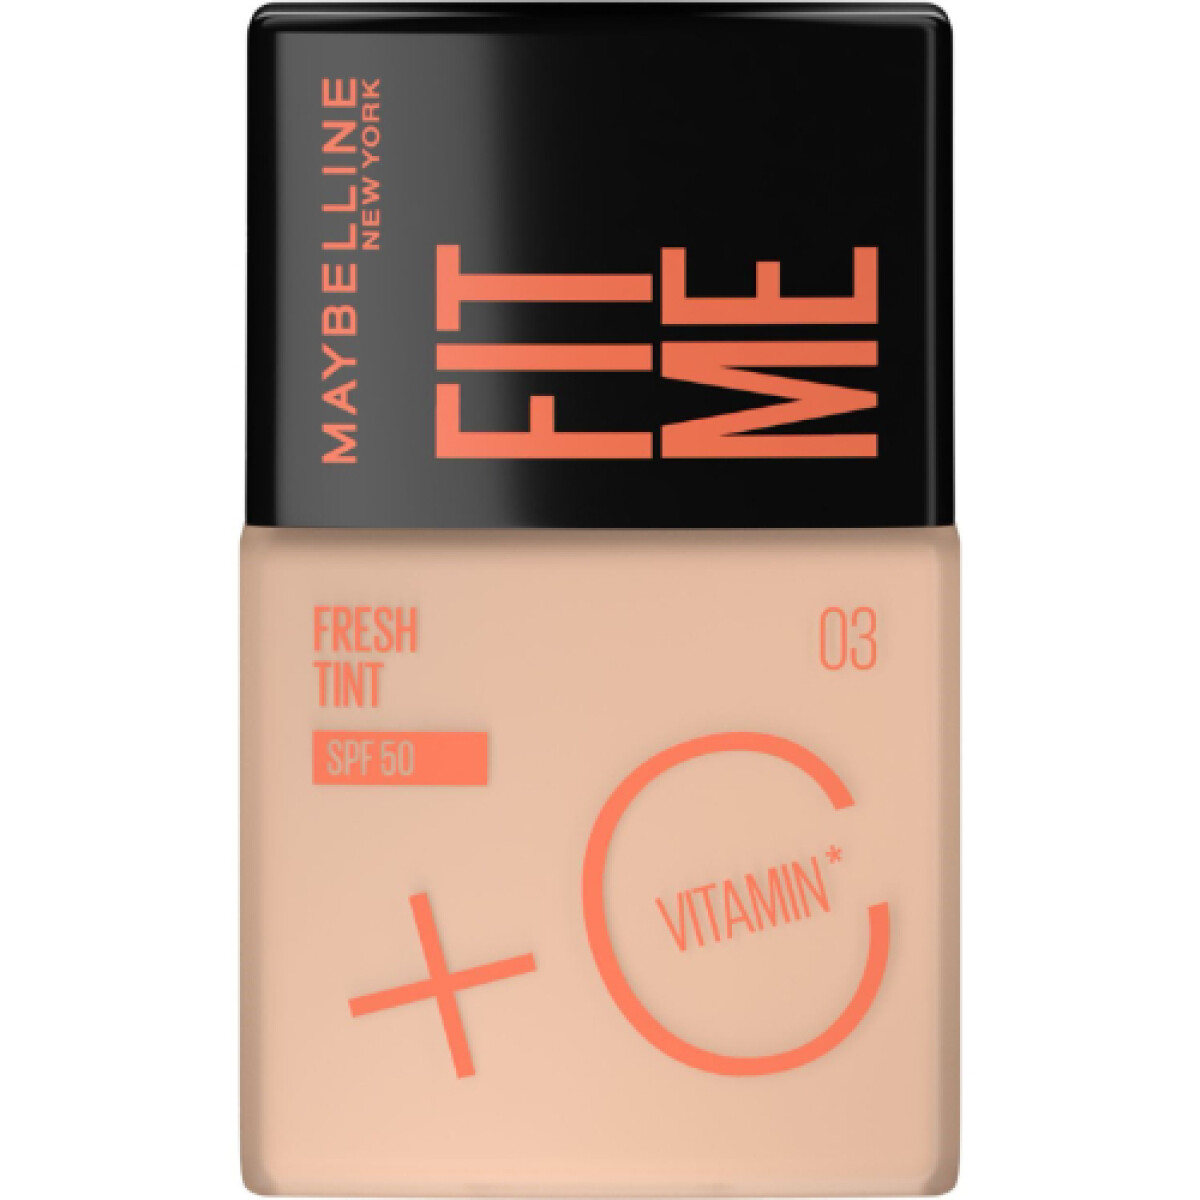 Base Maybelline Fit Me Fresh Tint SPF50 - 03 